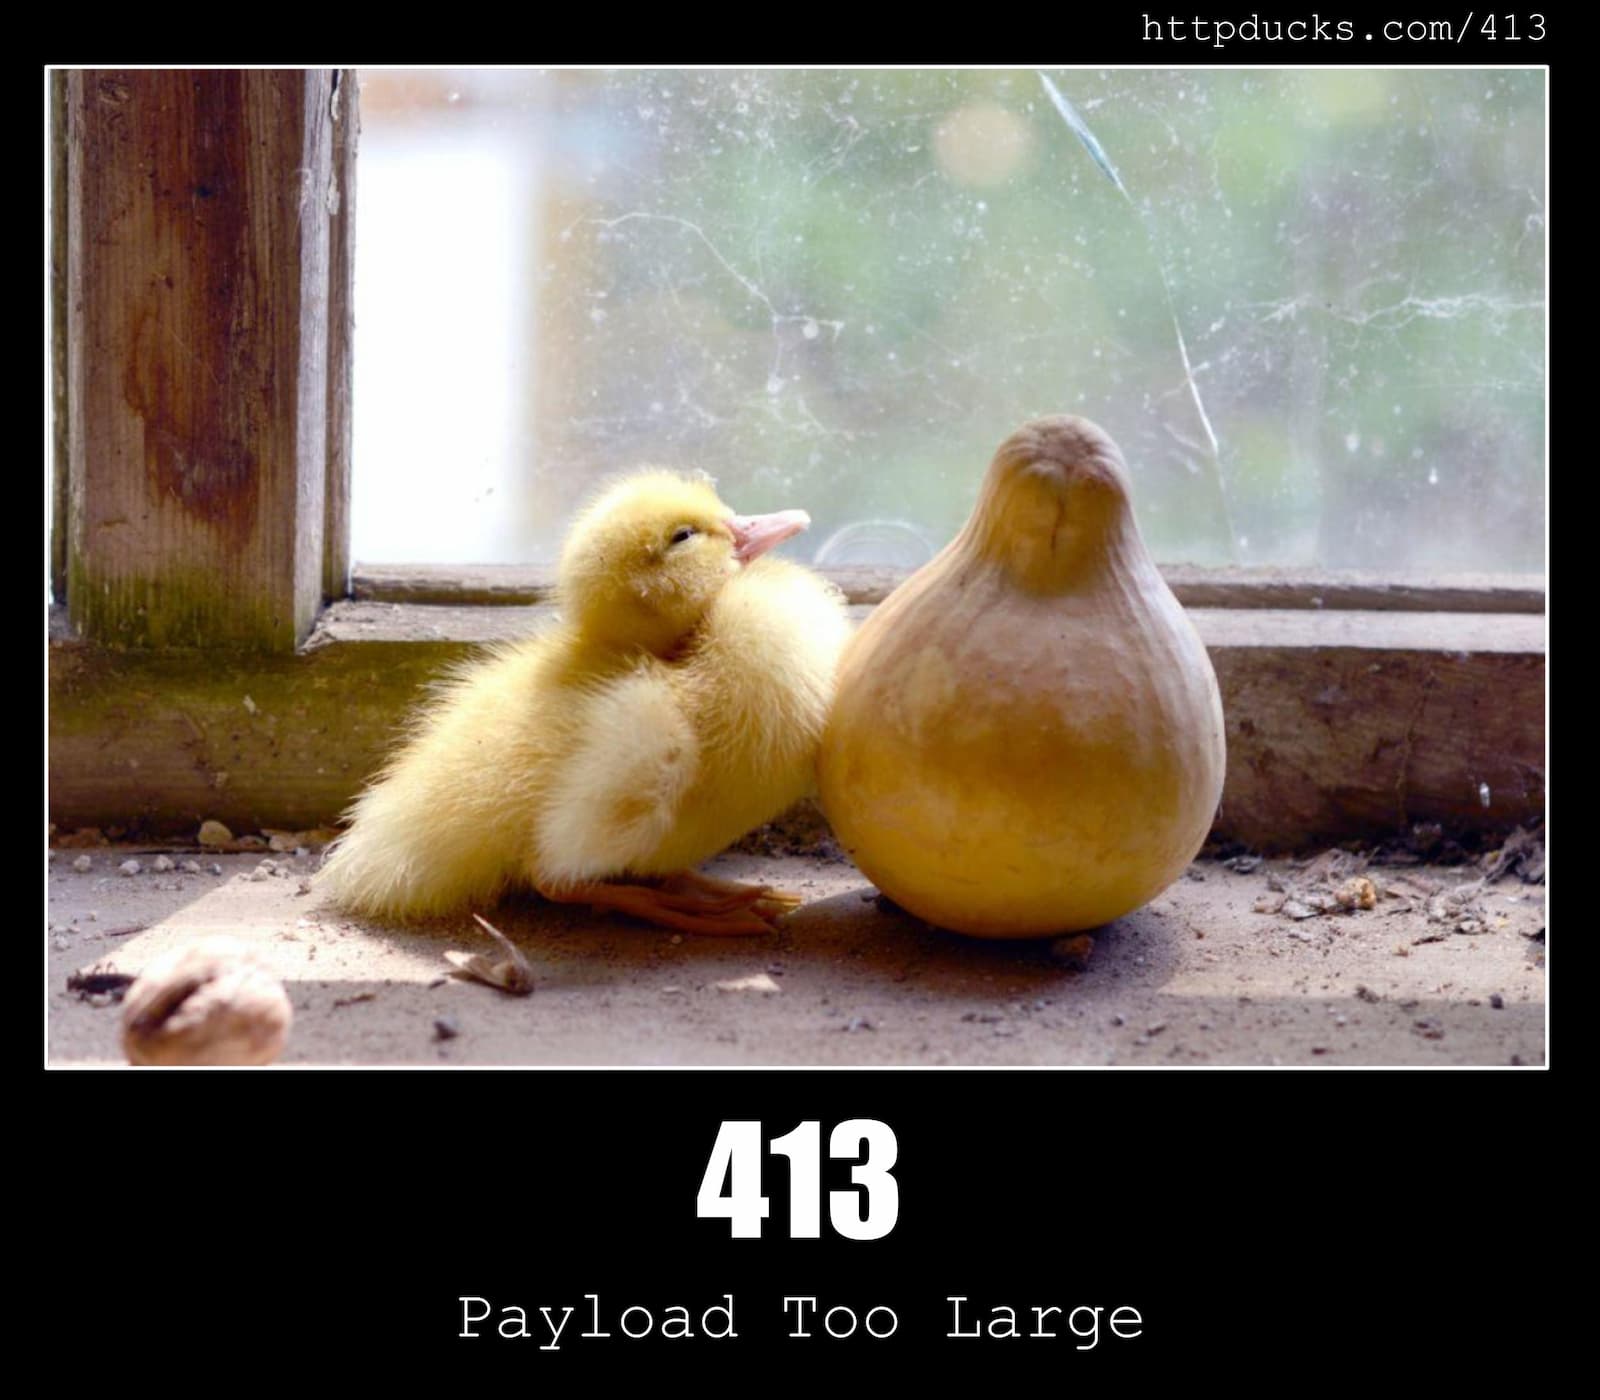 HTTP Status Code 413 Payload Too Large & Ducks